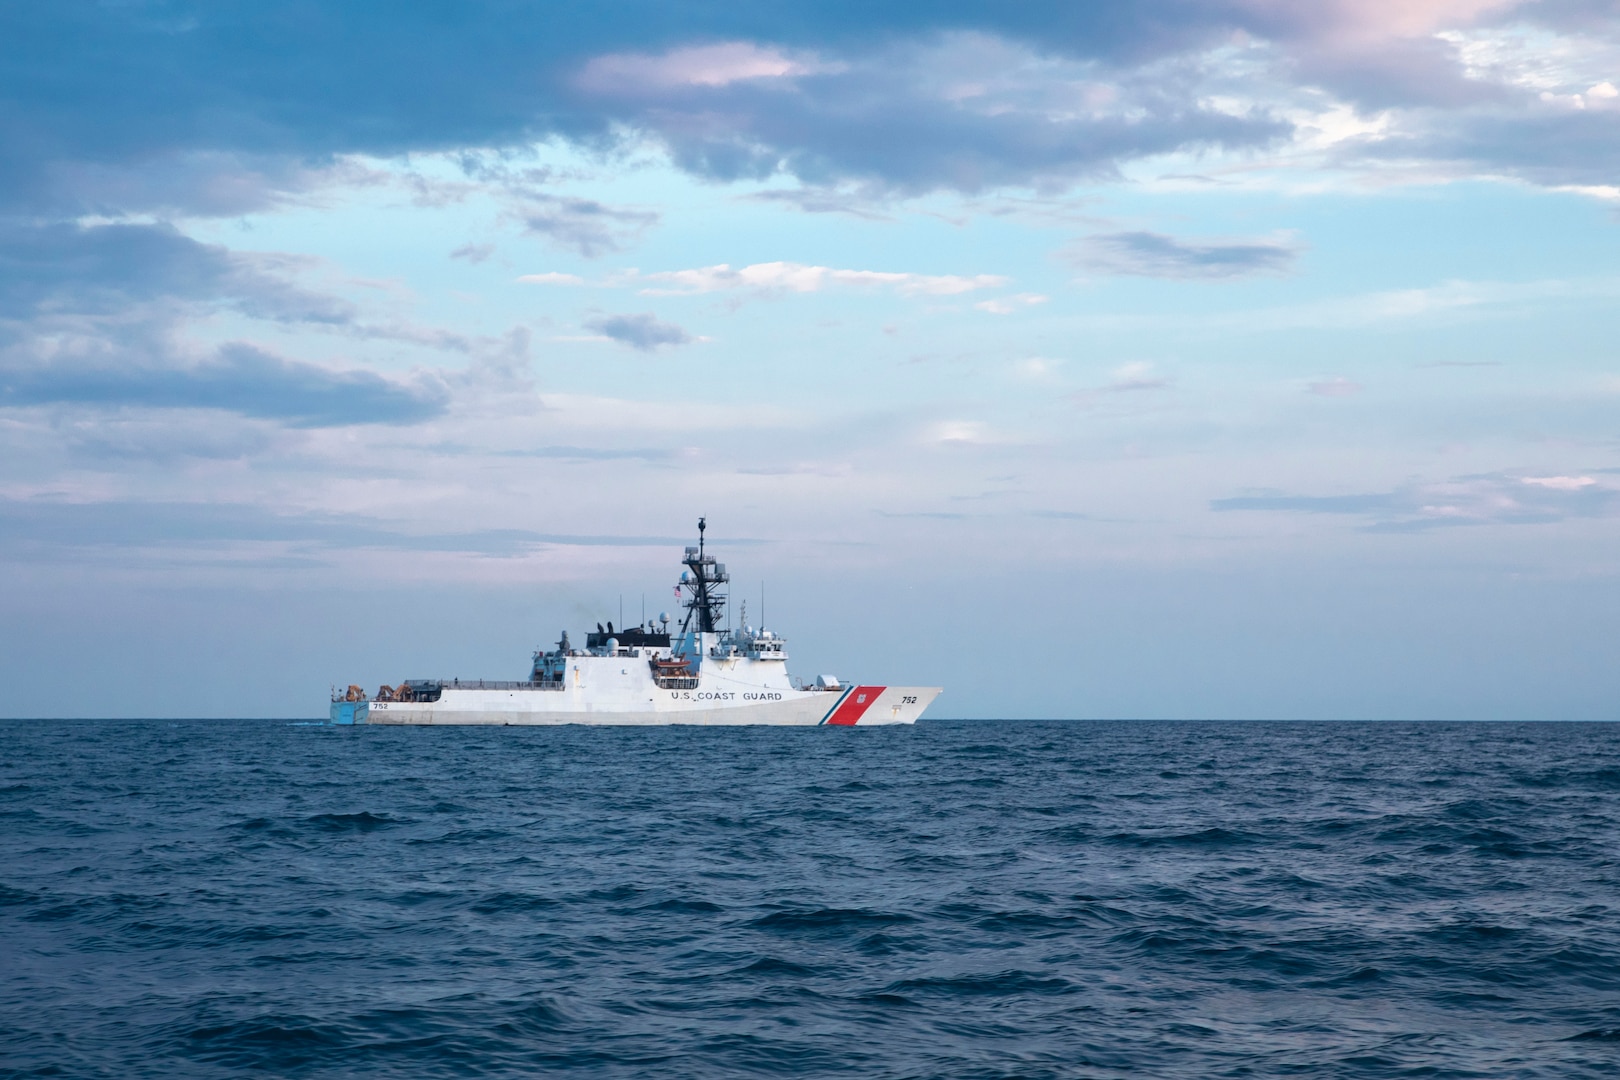 U.S. Coast Guard Cutter Stratton (WMSL 752) conducts passing exercises with Indonesian Maritime Security Agency patrol boat KN Belut Laut-406 and Republic of Singapore Navy MSRV Bastion on May 22, 2023. Stratton deployed to the Western Pacific to conduct engagements with regional allies and partner nations, to reinforce a rules-based order in the maritime domain. (U.S. Coast Guard photo by Chief Petty Officer Brett Cote)